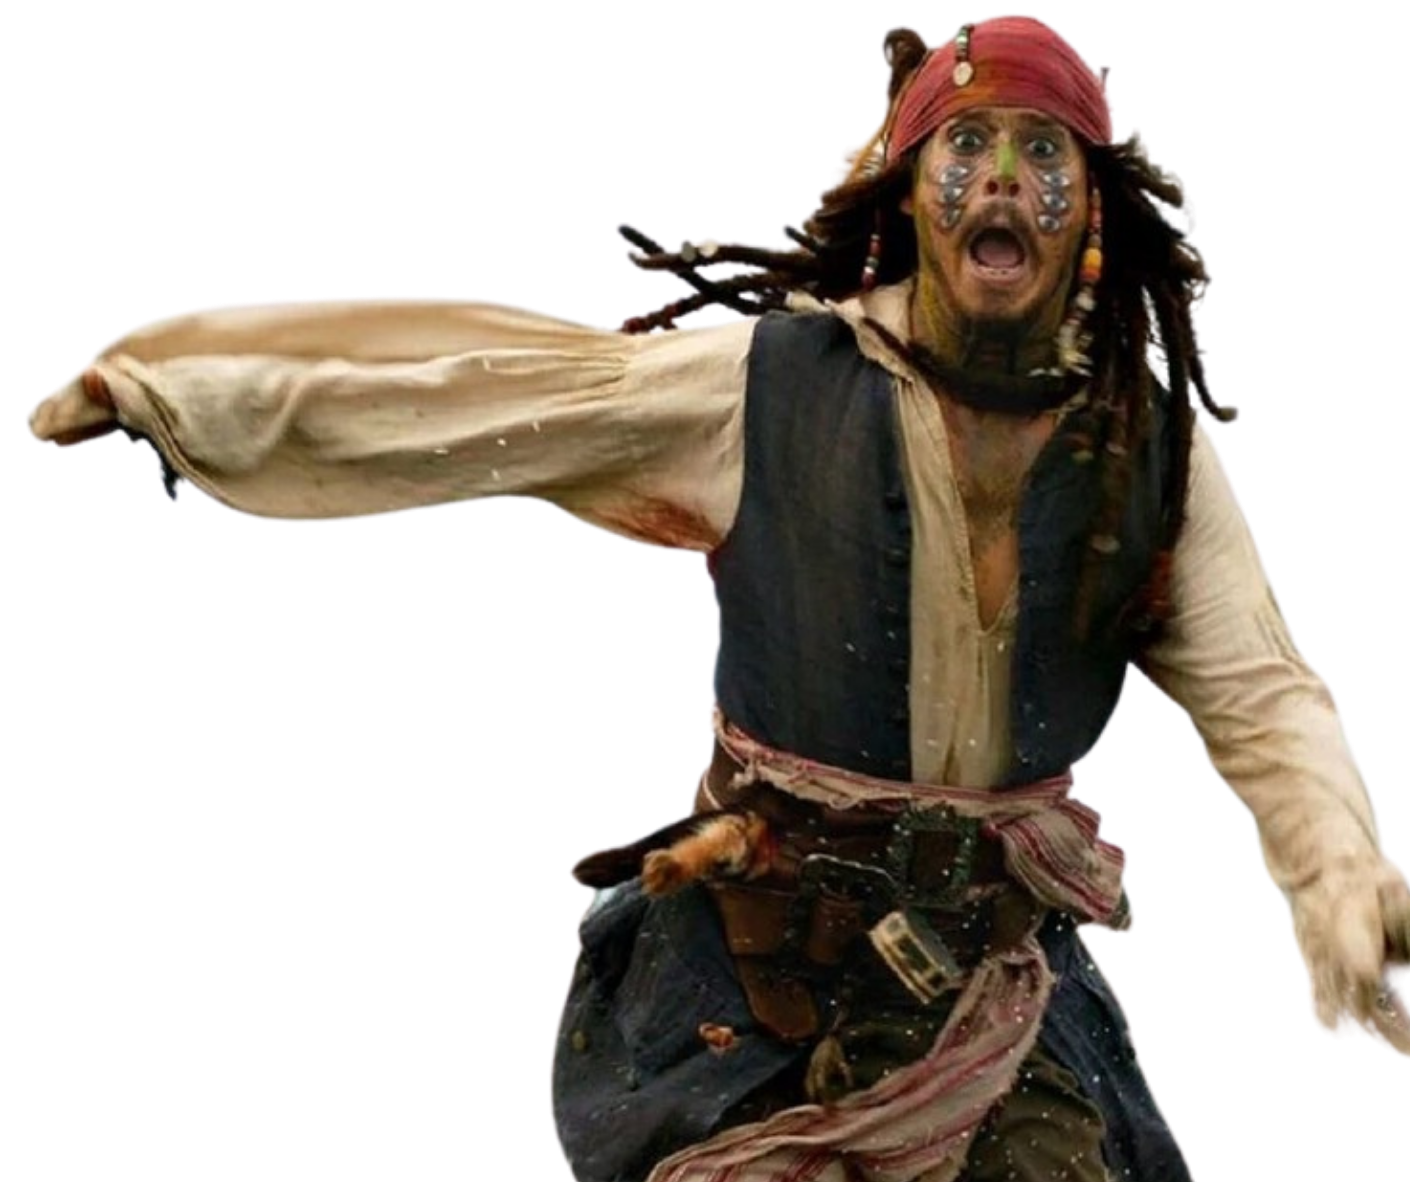 Jack Sparrow, main character of the movie.